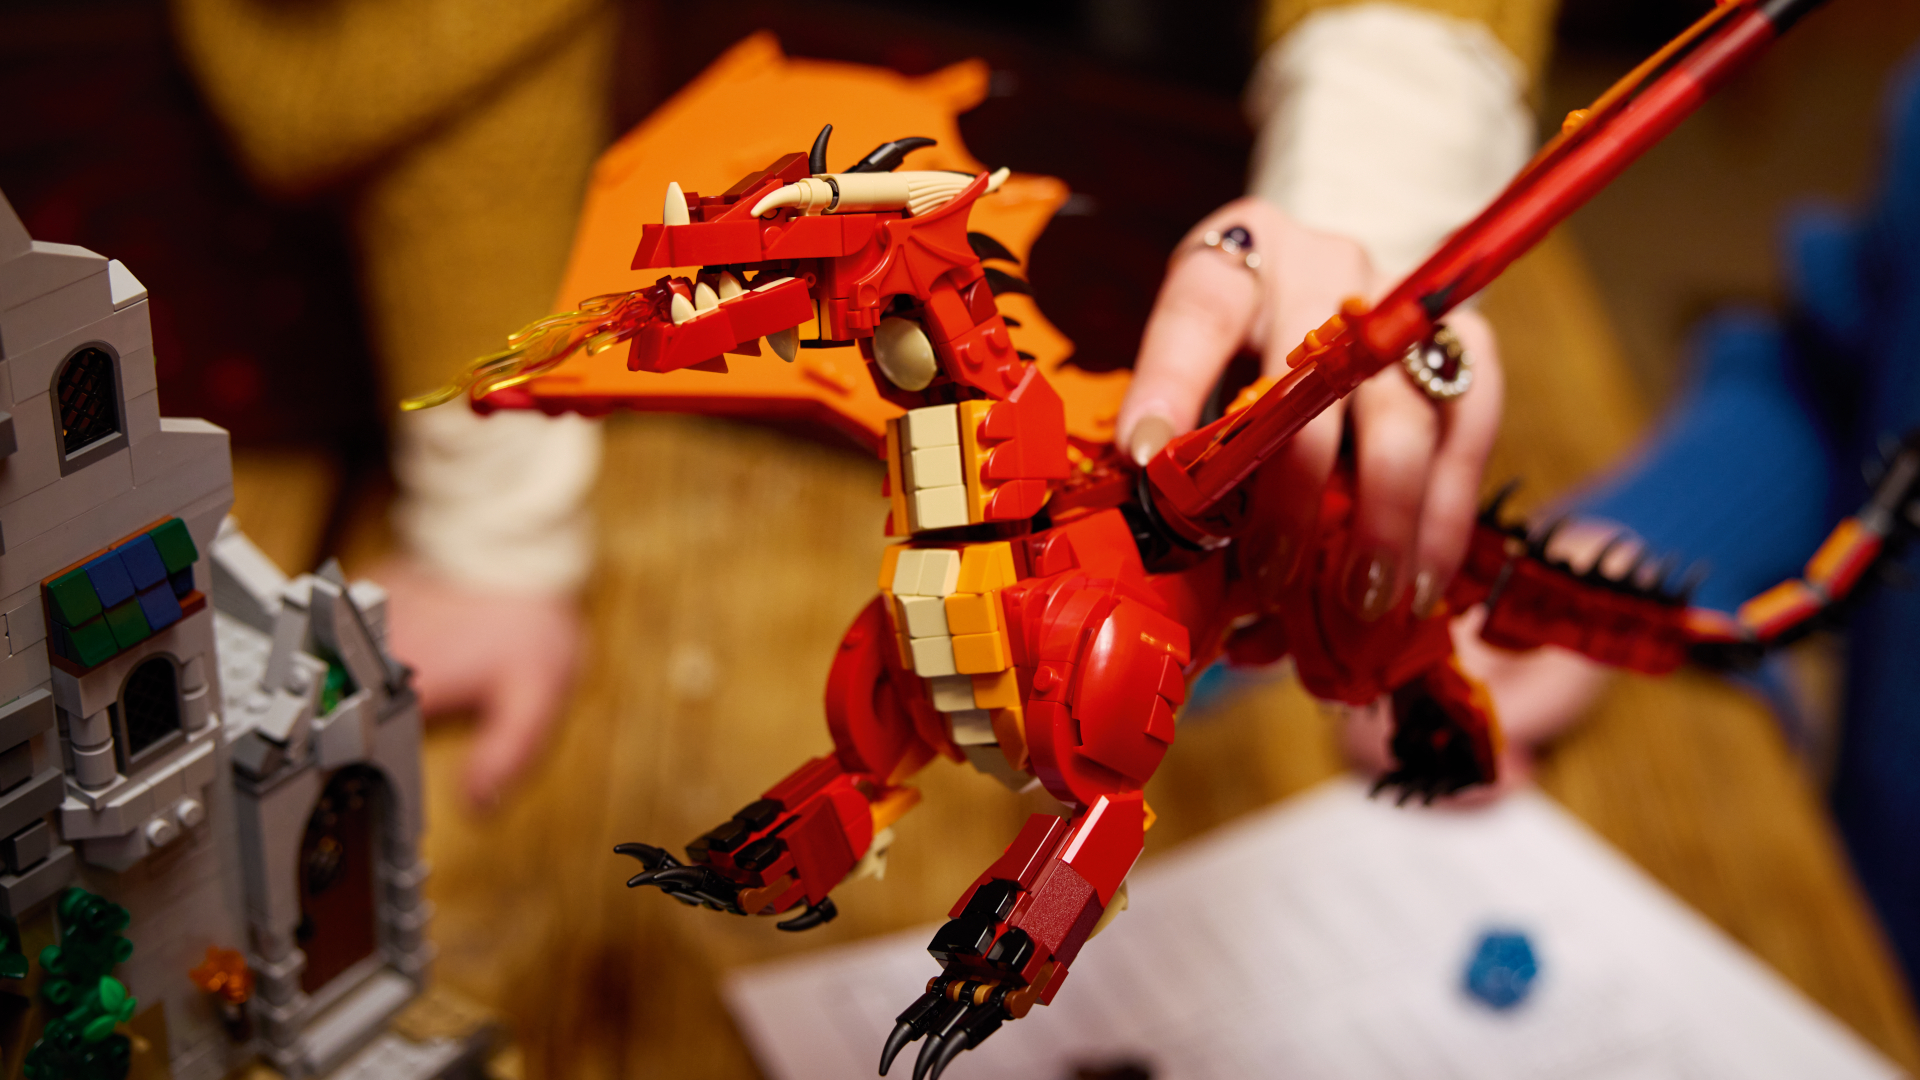 Lego D&D dragon being held above a wooden table and the Lego D&D set